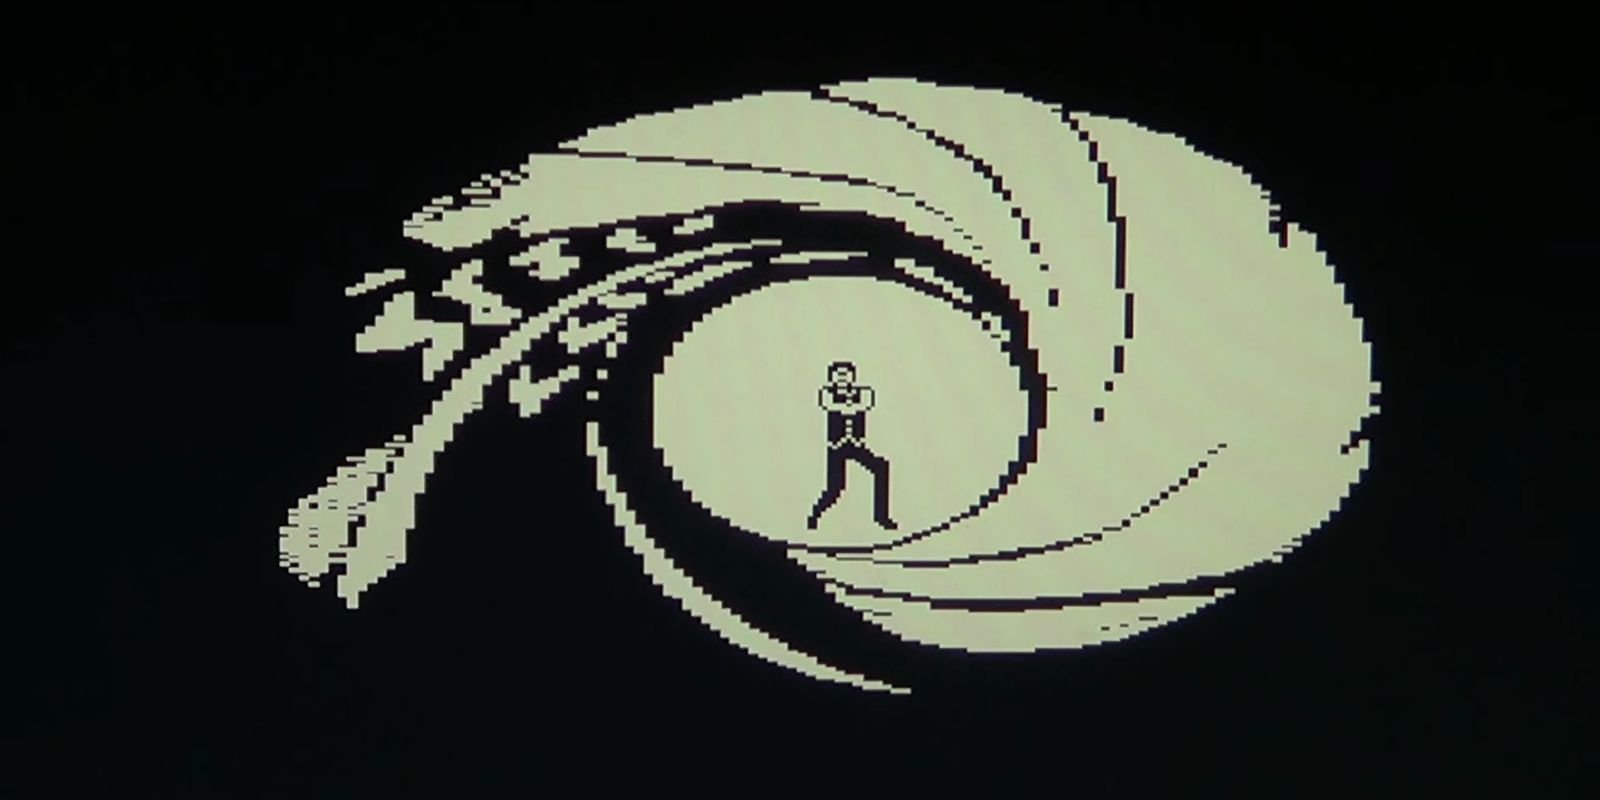 The iconic James Bond gun barrel sequence on Commodore 64